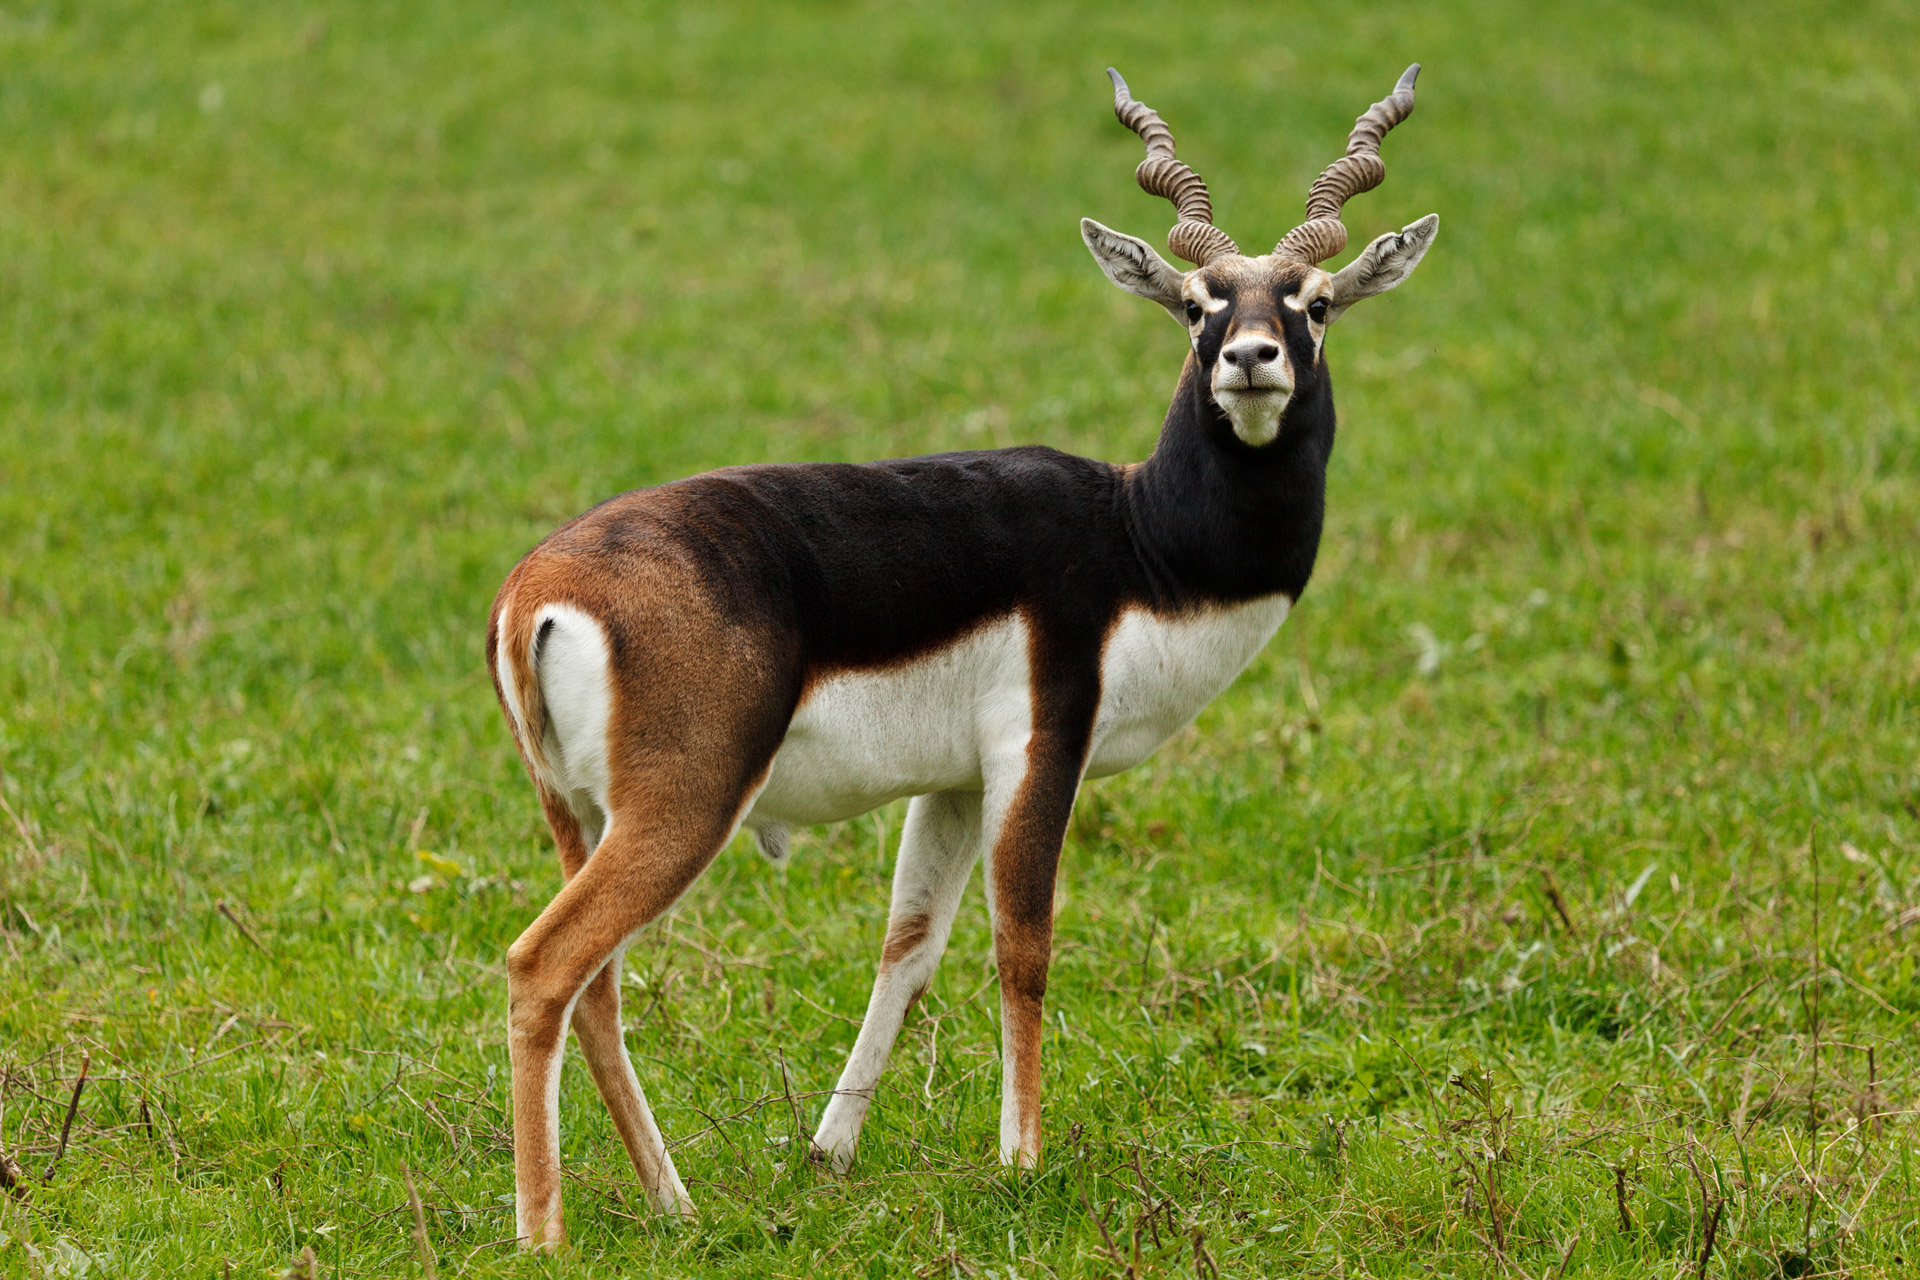 27 Interesting And Weird Facts About Antelopes - Tons Of Facts